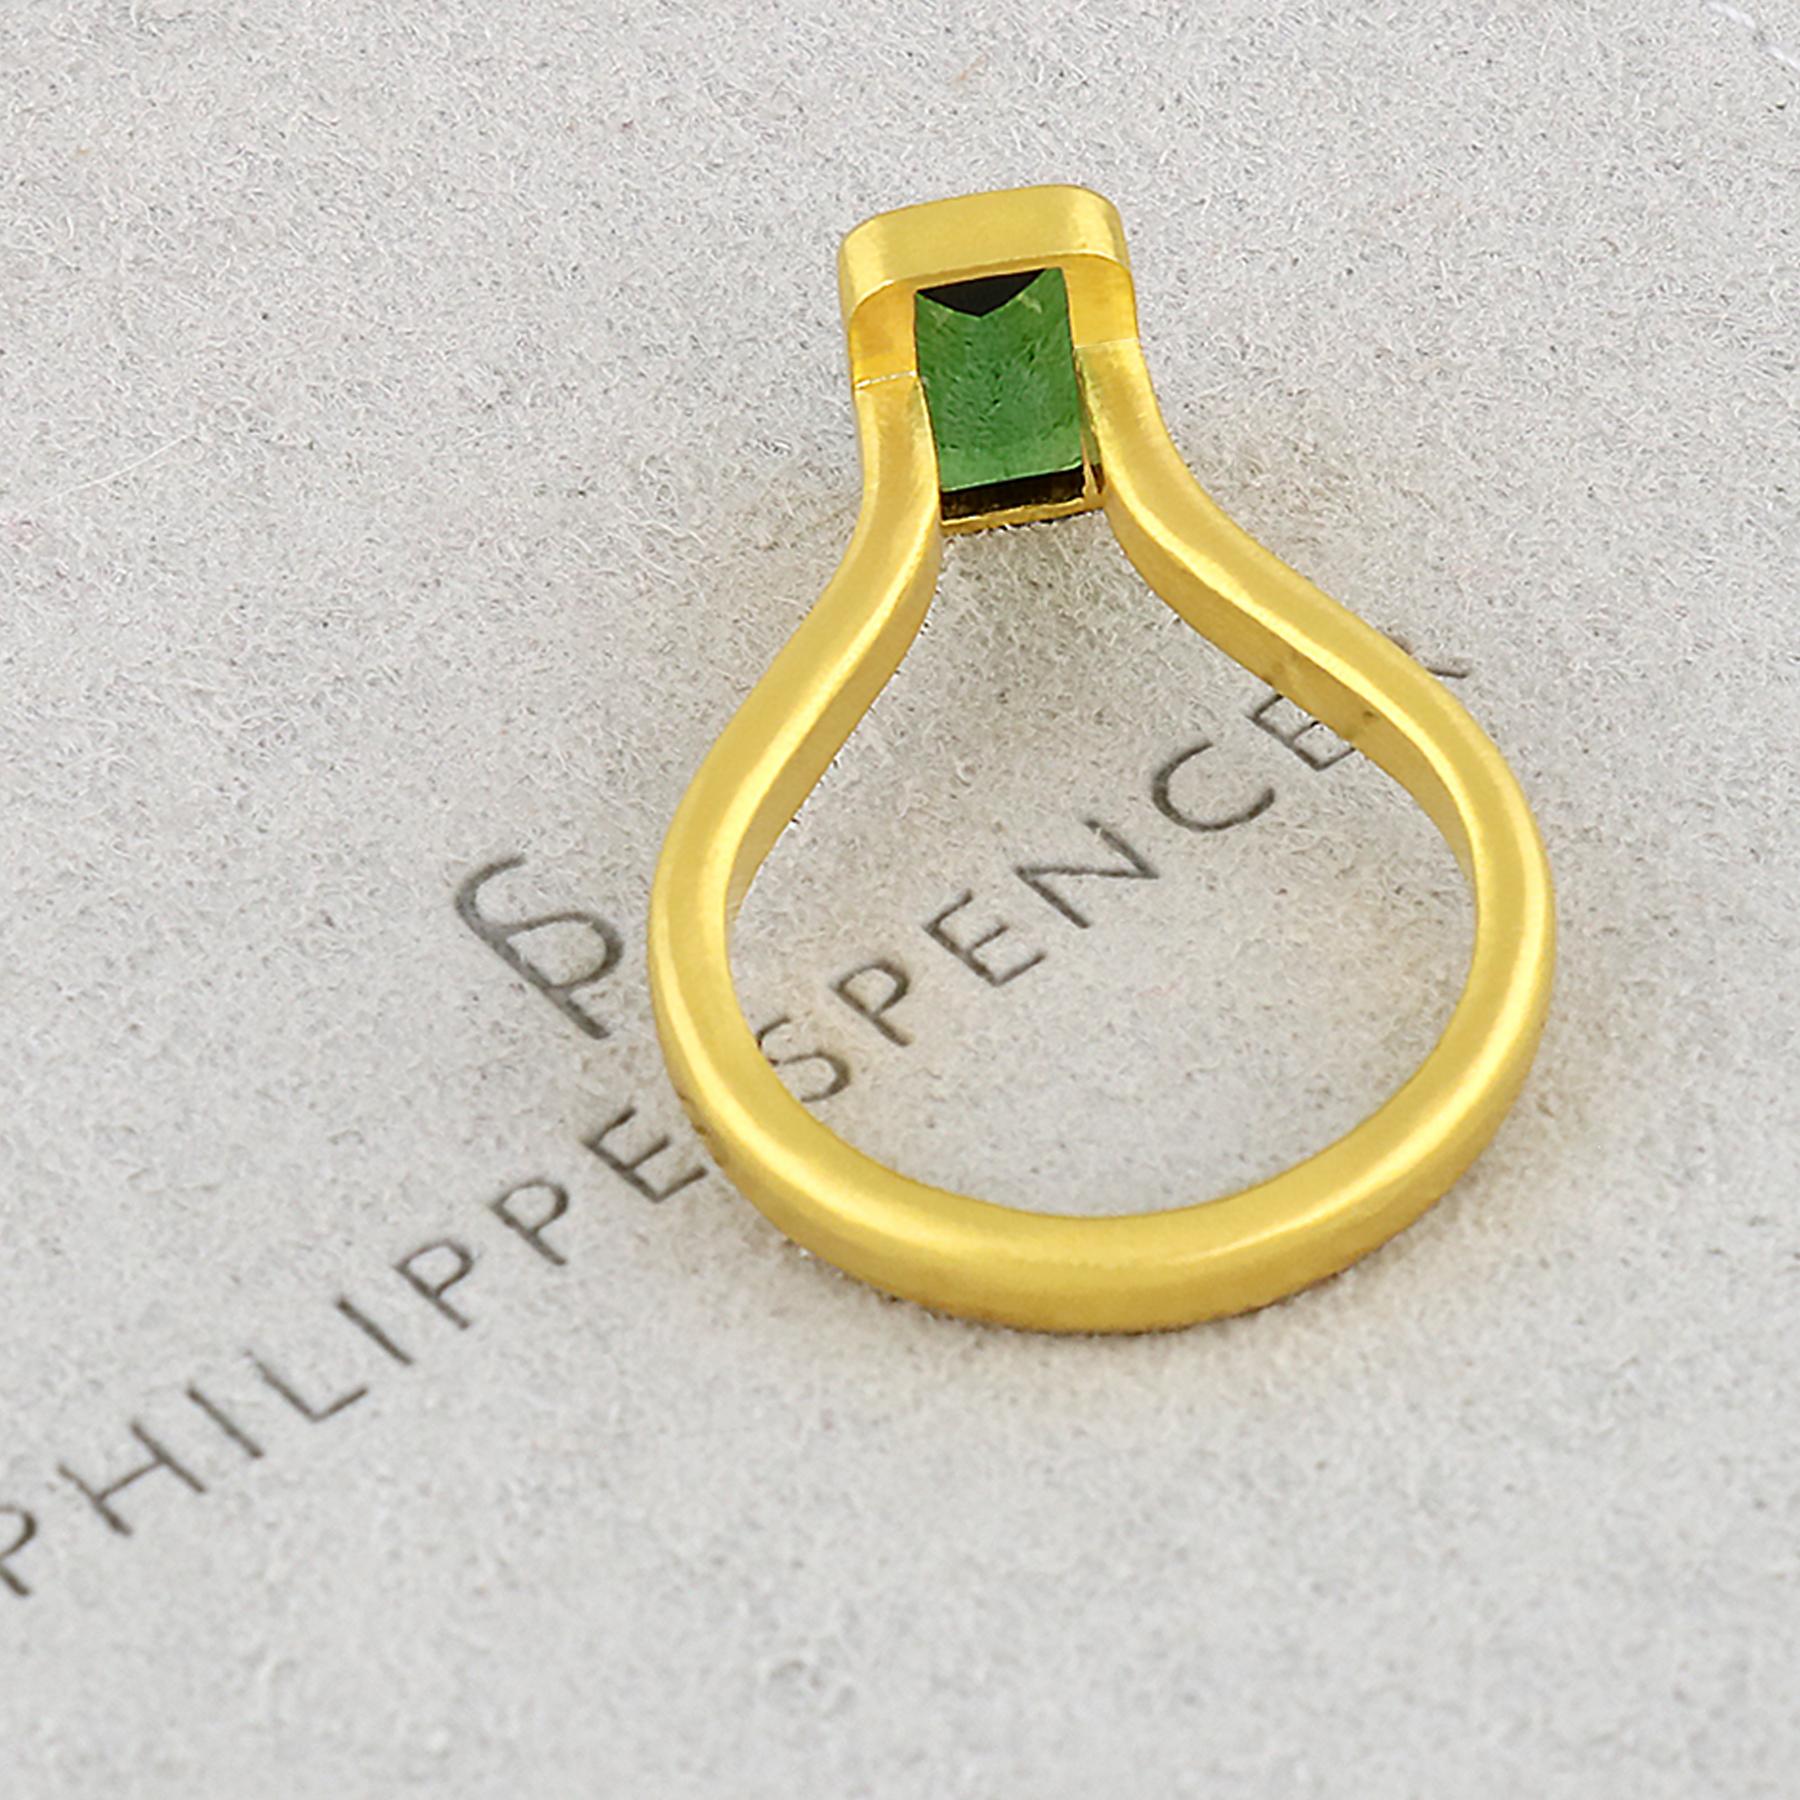 PHILIPPE SPENCER - Solid 22K Gold Completely Hand -Forged One-Of-A-Kind High-Set Statement Ring with 1.7 Ct. Extra-Fine Emerald Cut Green Tourmaline set in backless 22K Gold Setting. Heavy Matte Brushed Finish. Size 7 1/4 to 7 3/4, and is in-stock